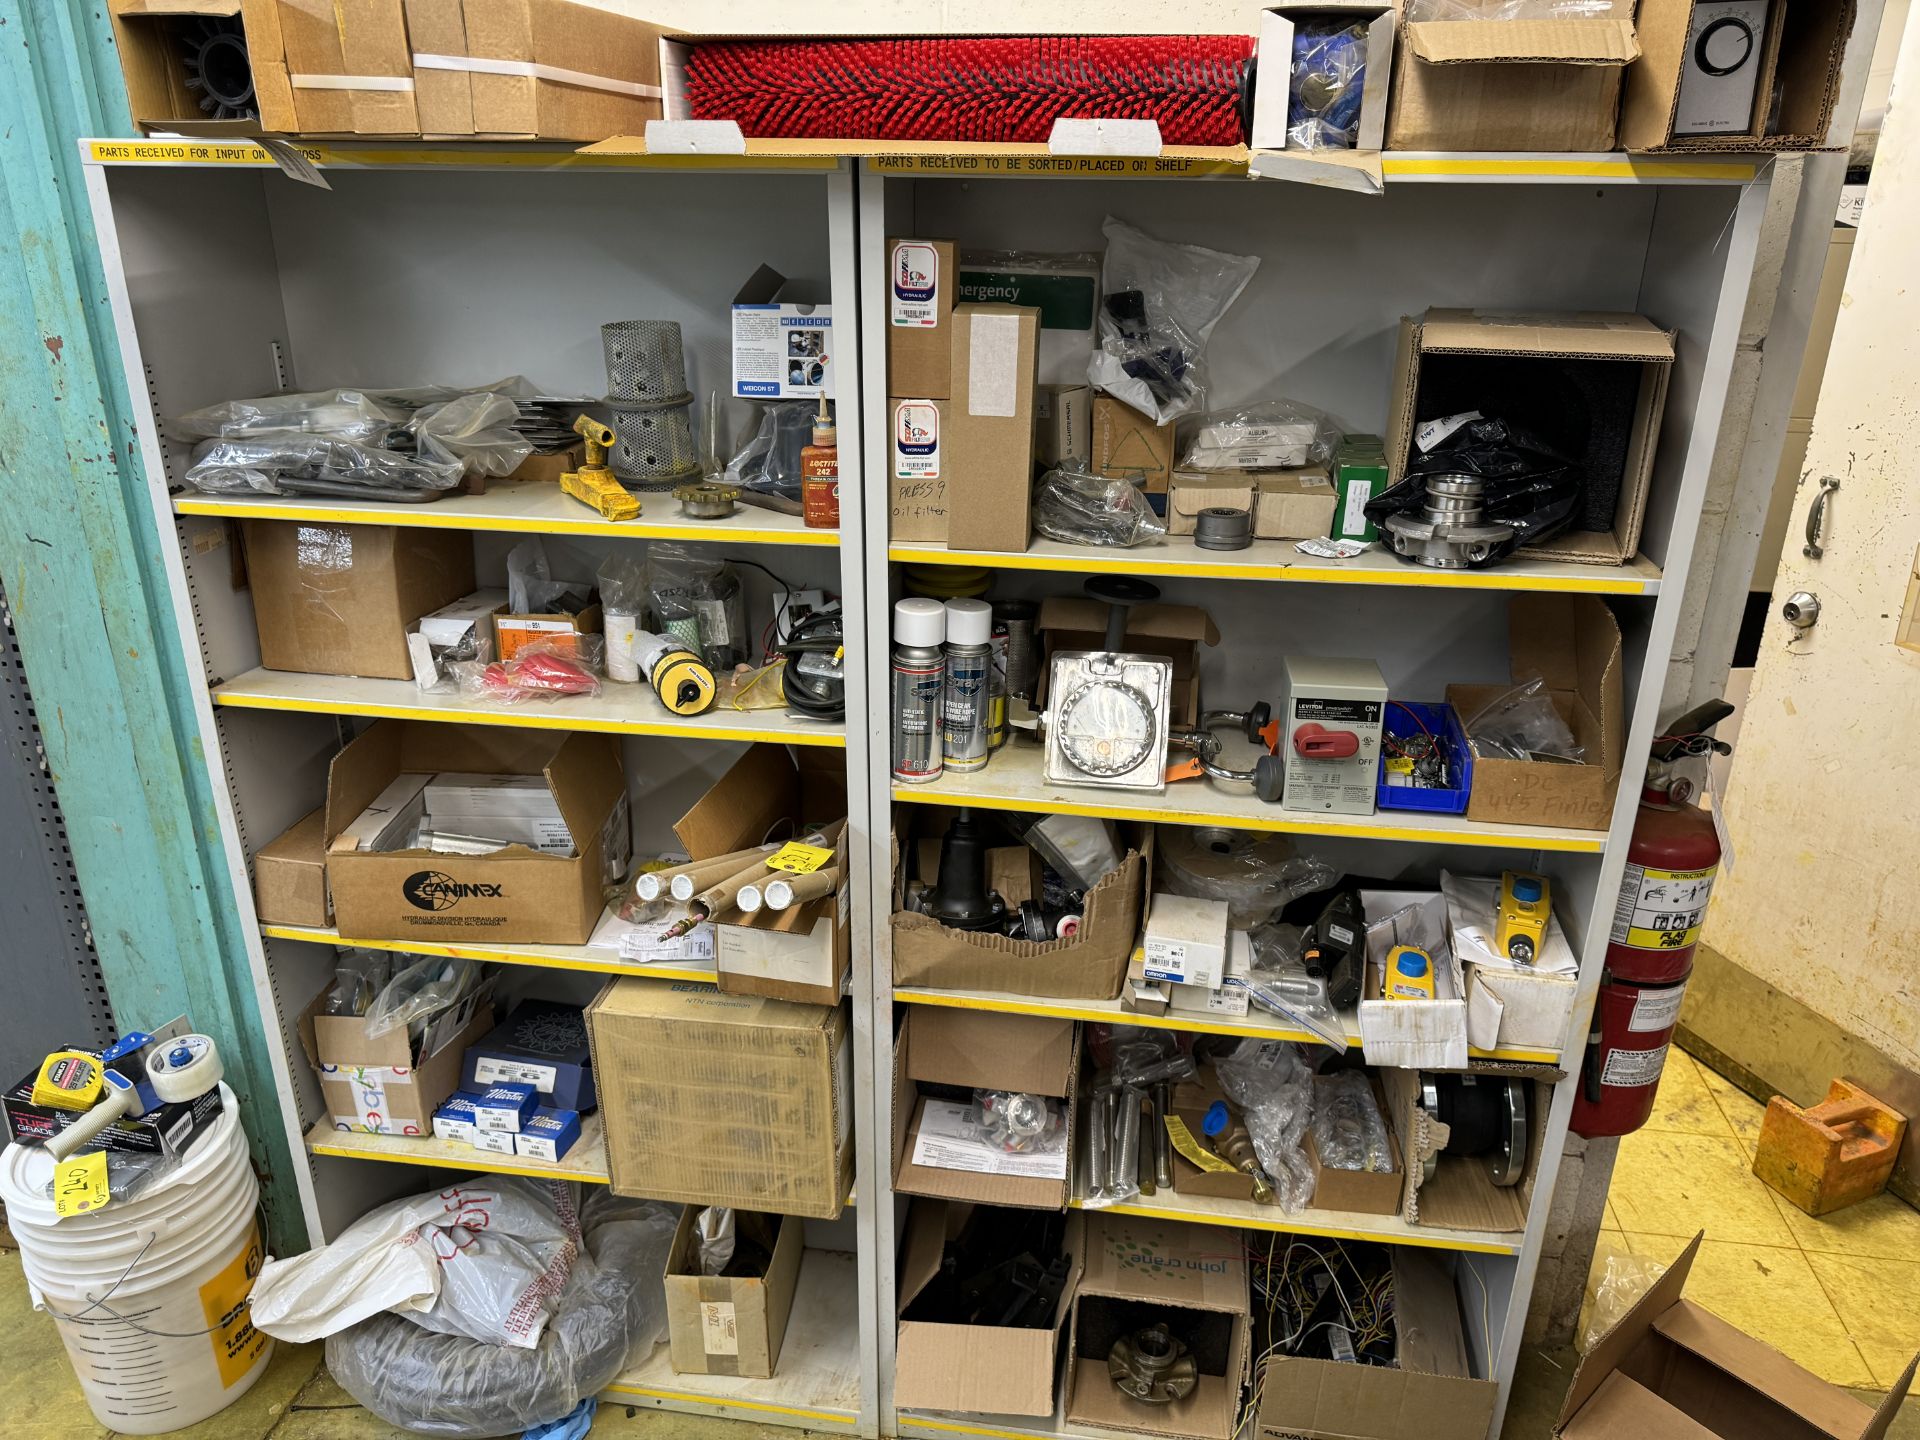 LOT OF (2) METAL SHELVING UNITS W/ PARTS INCLUDING BALLASTS, VALVES, FILTER HOUSING, METERS, FILERS,